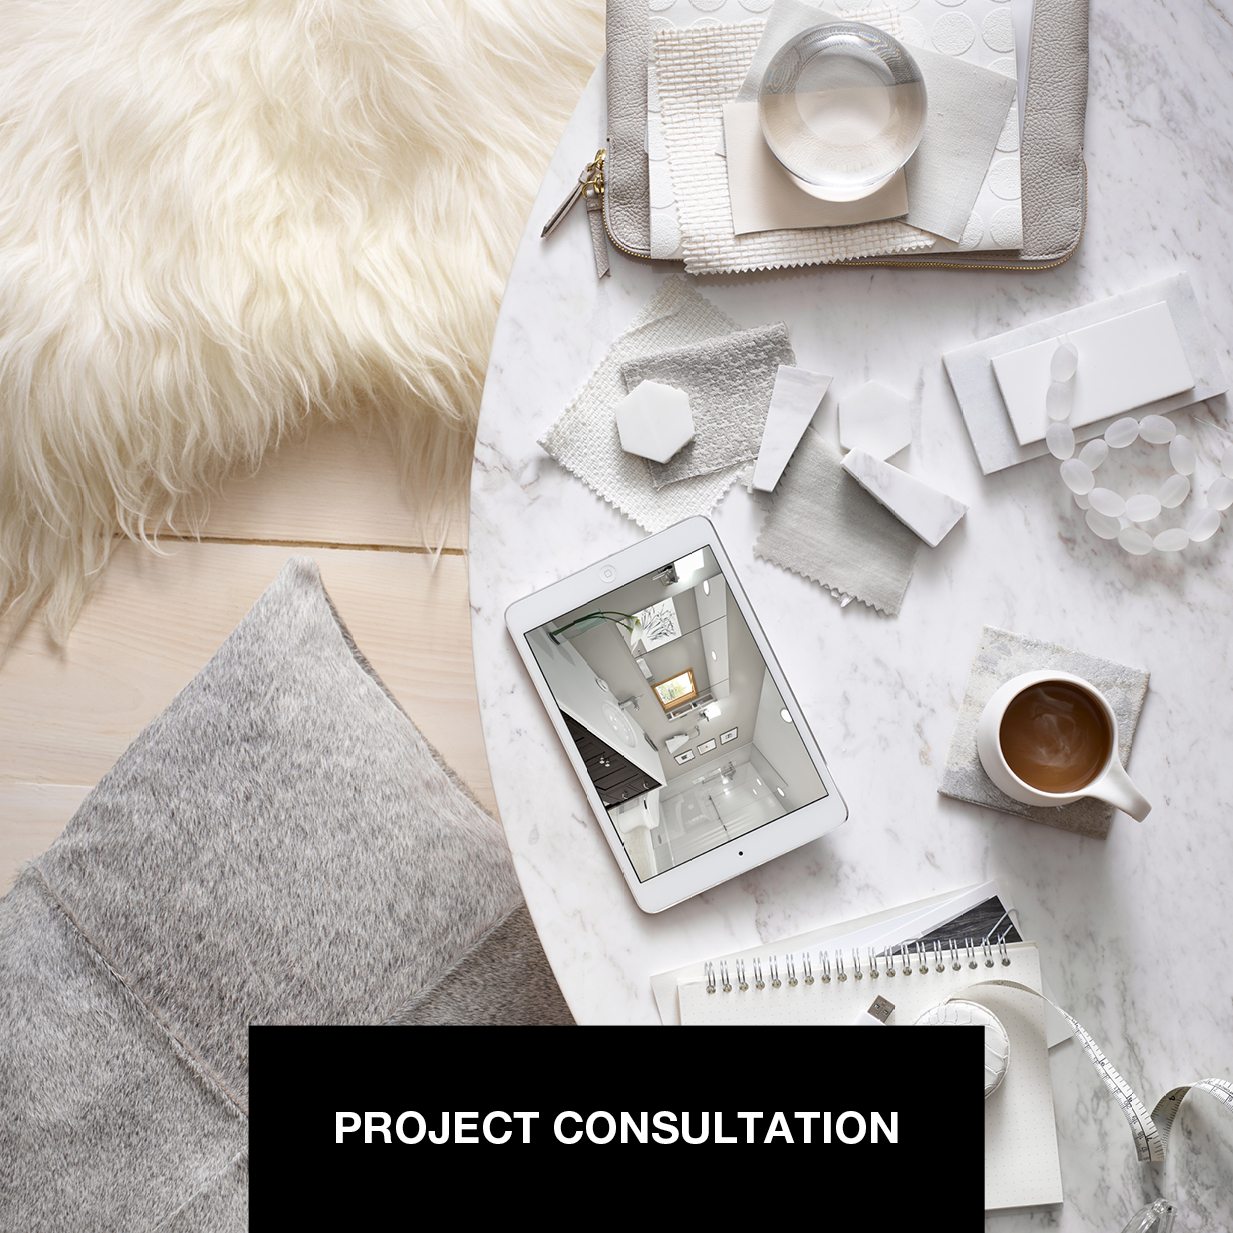 PROJECT CONSULTATION